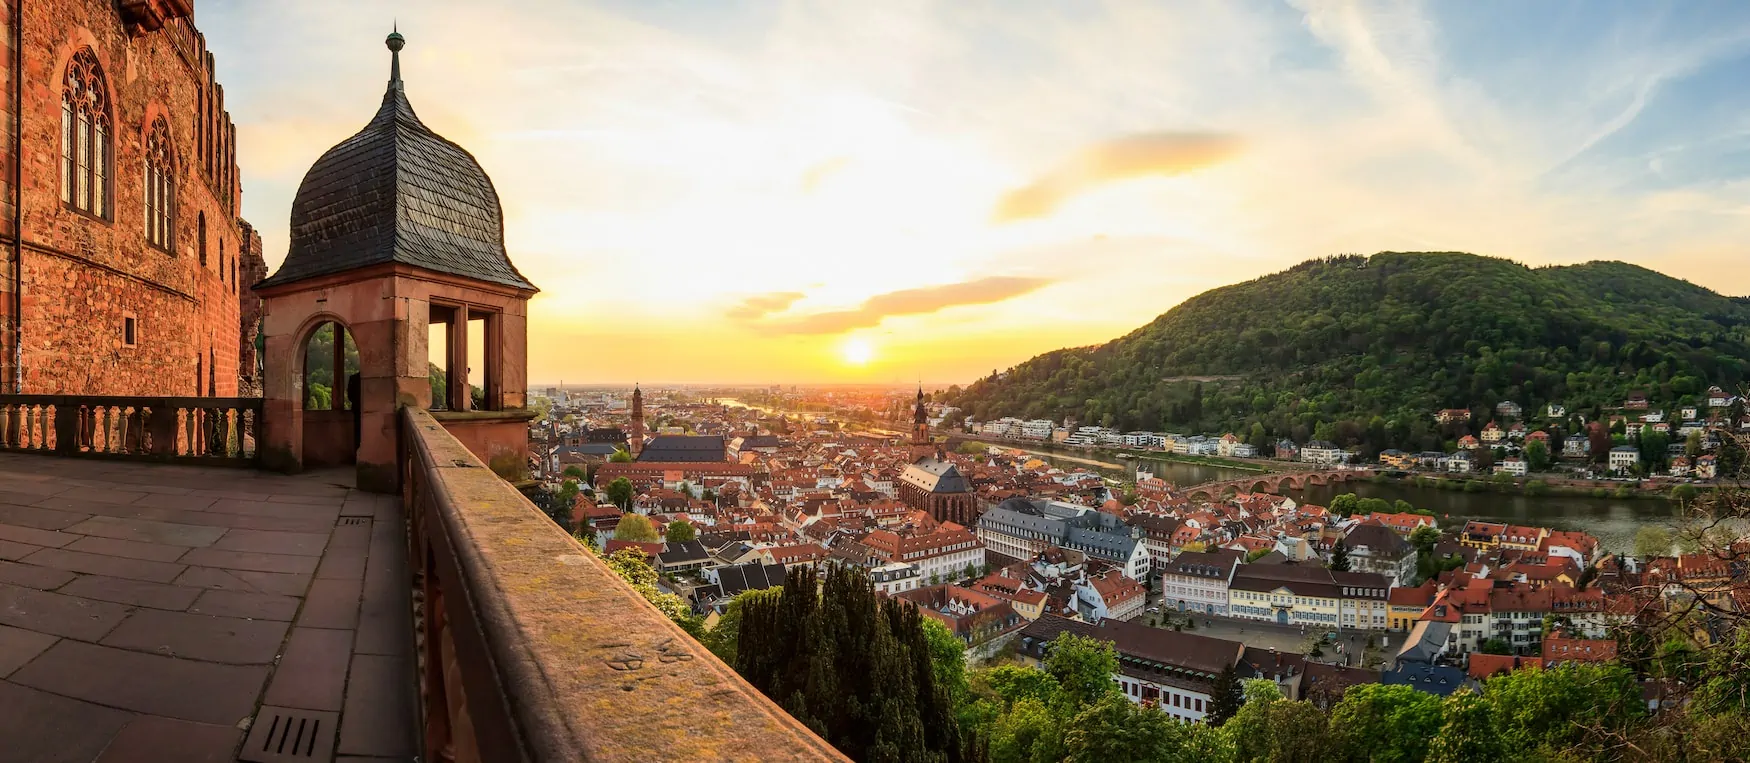 View from the Heidelberg Castle onto the city during sundown